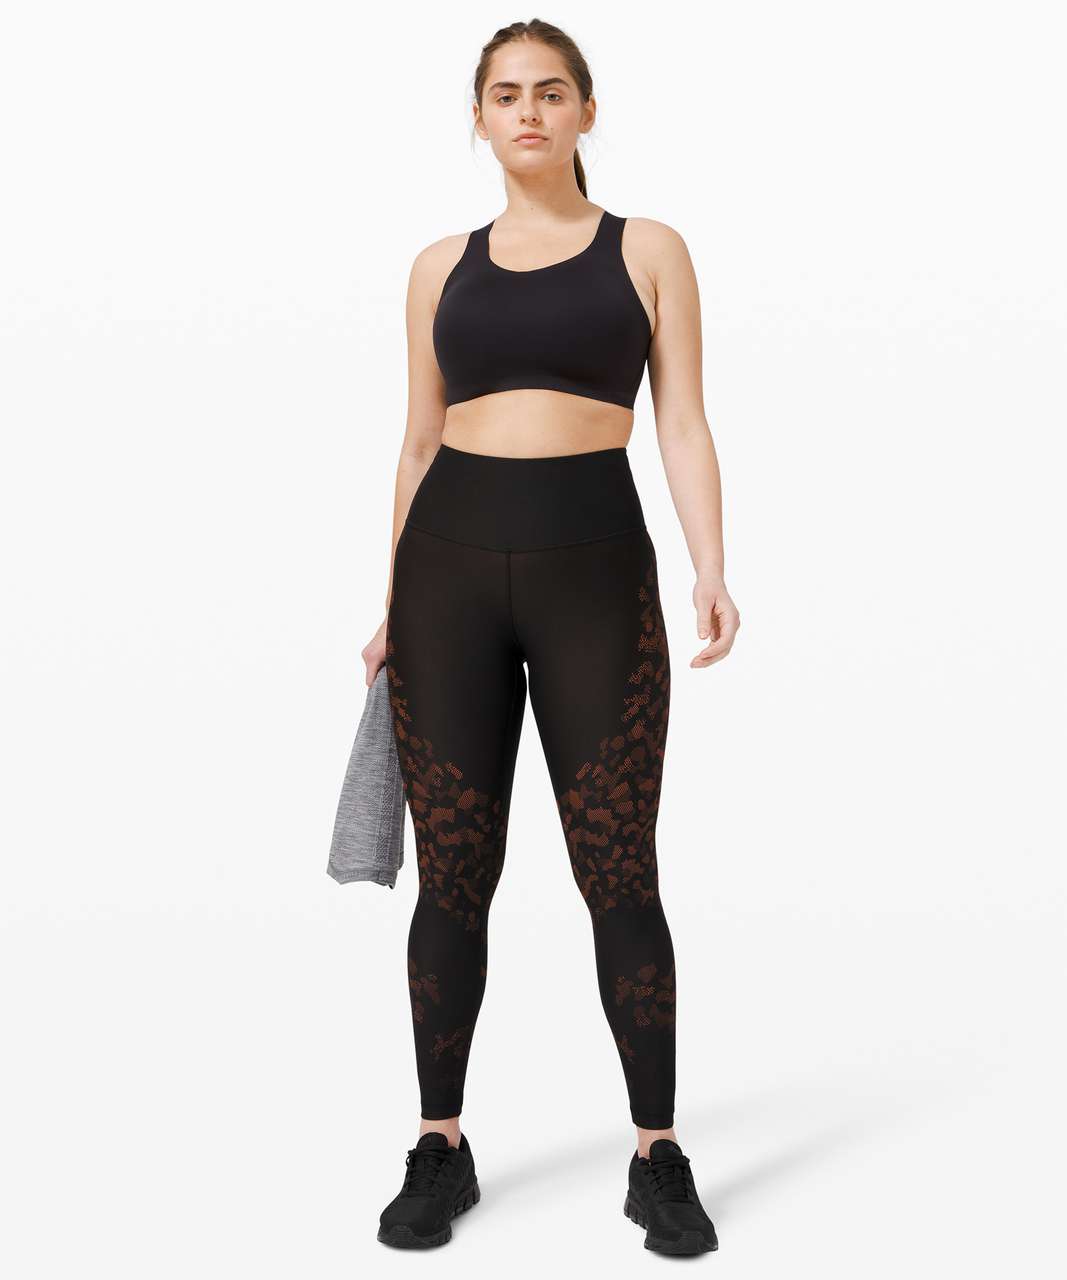 Lululemon Mapped Out High Rise Tight 28" *Camo - Black / Brick